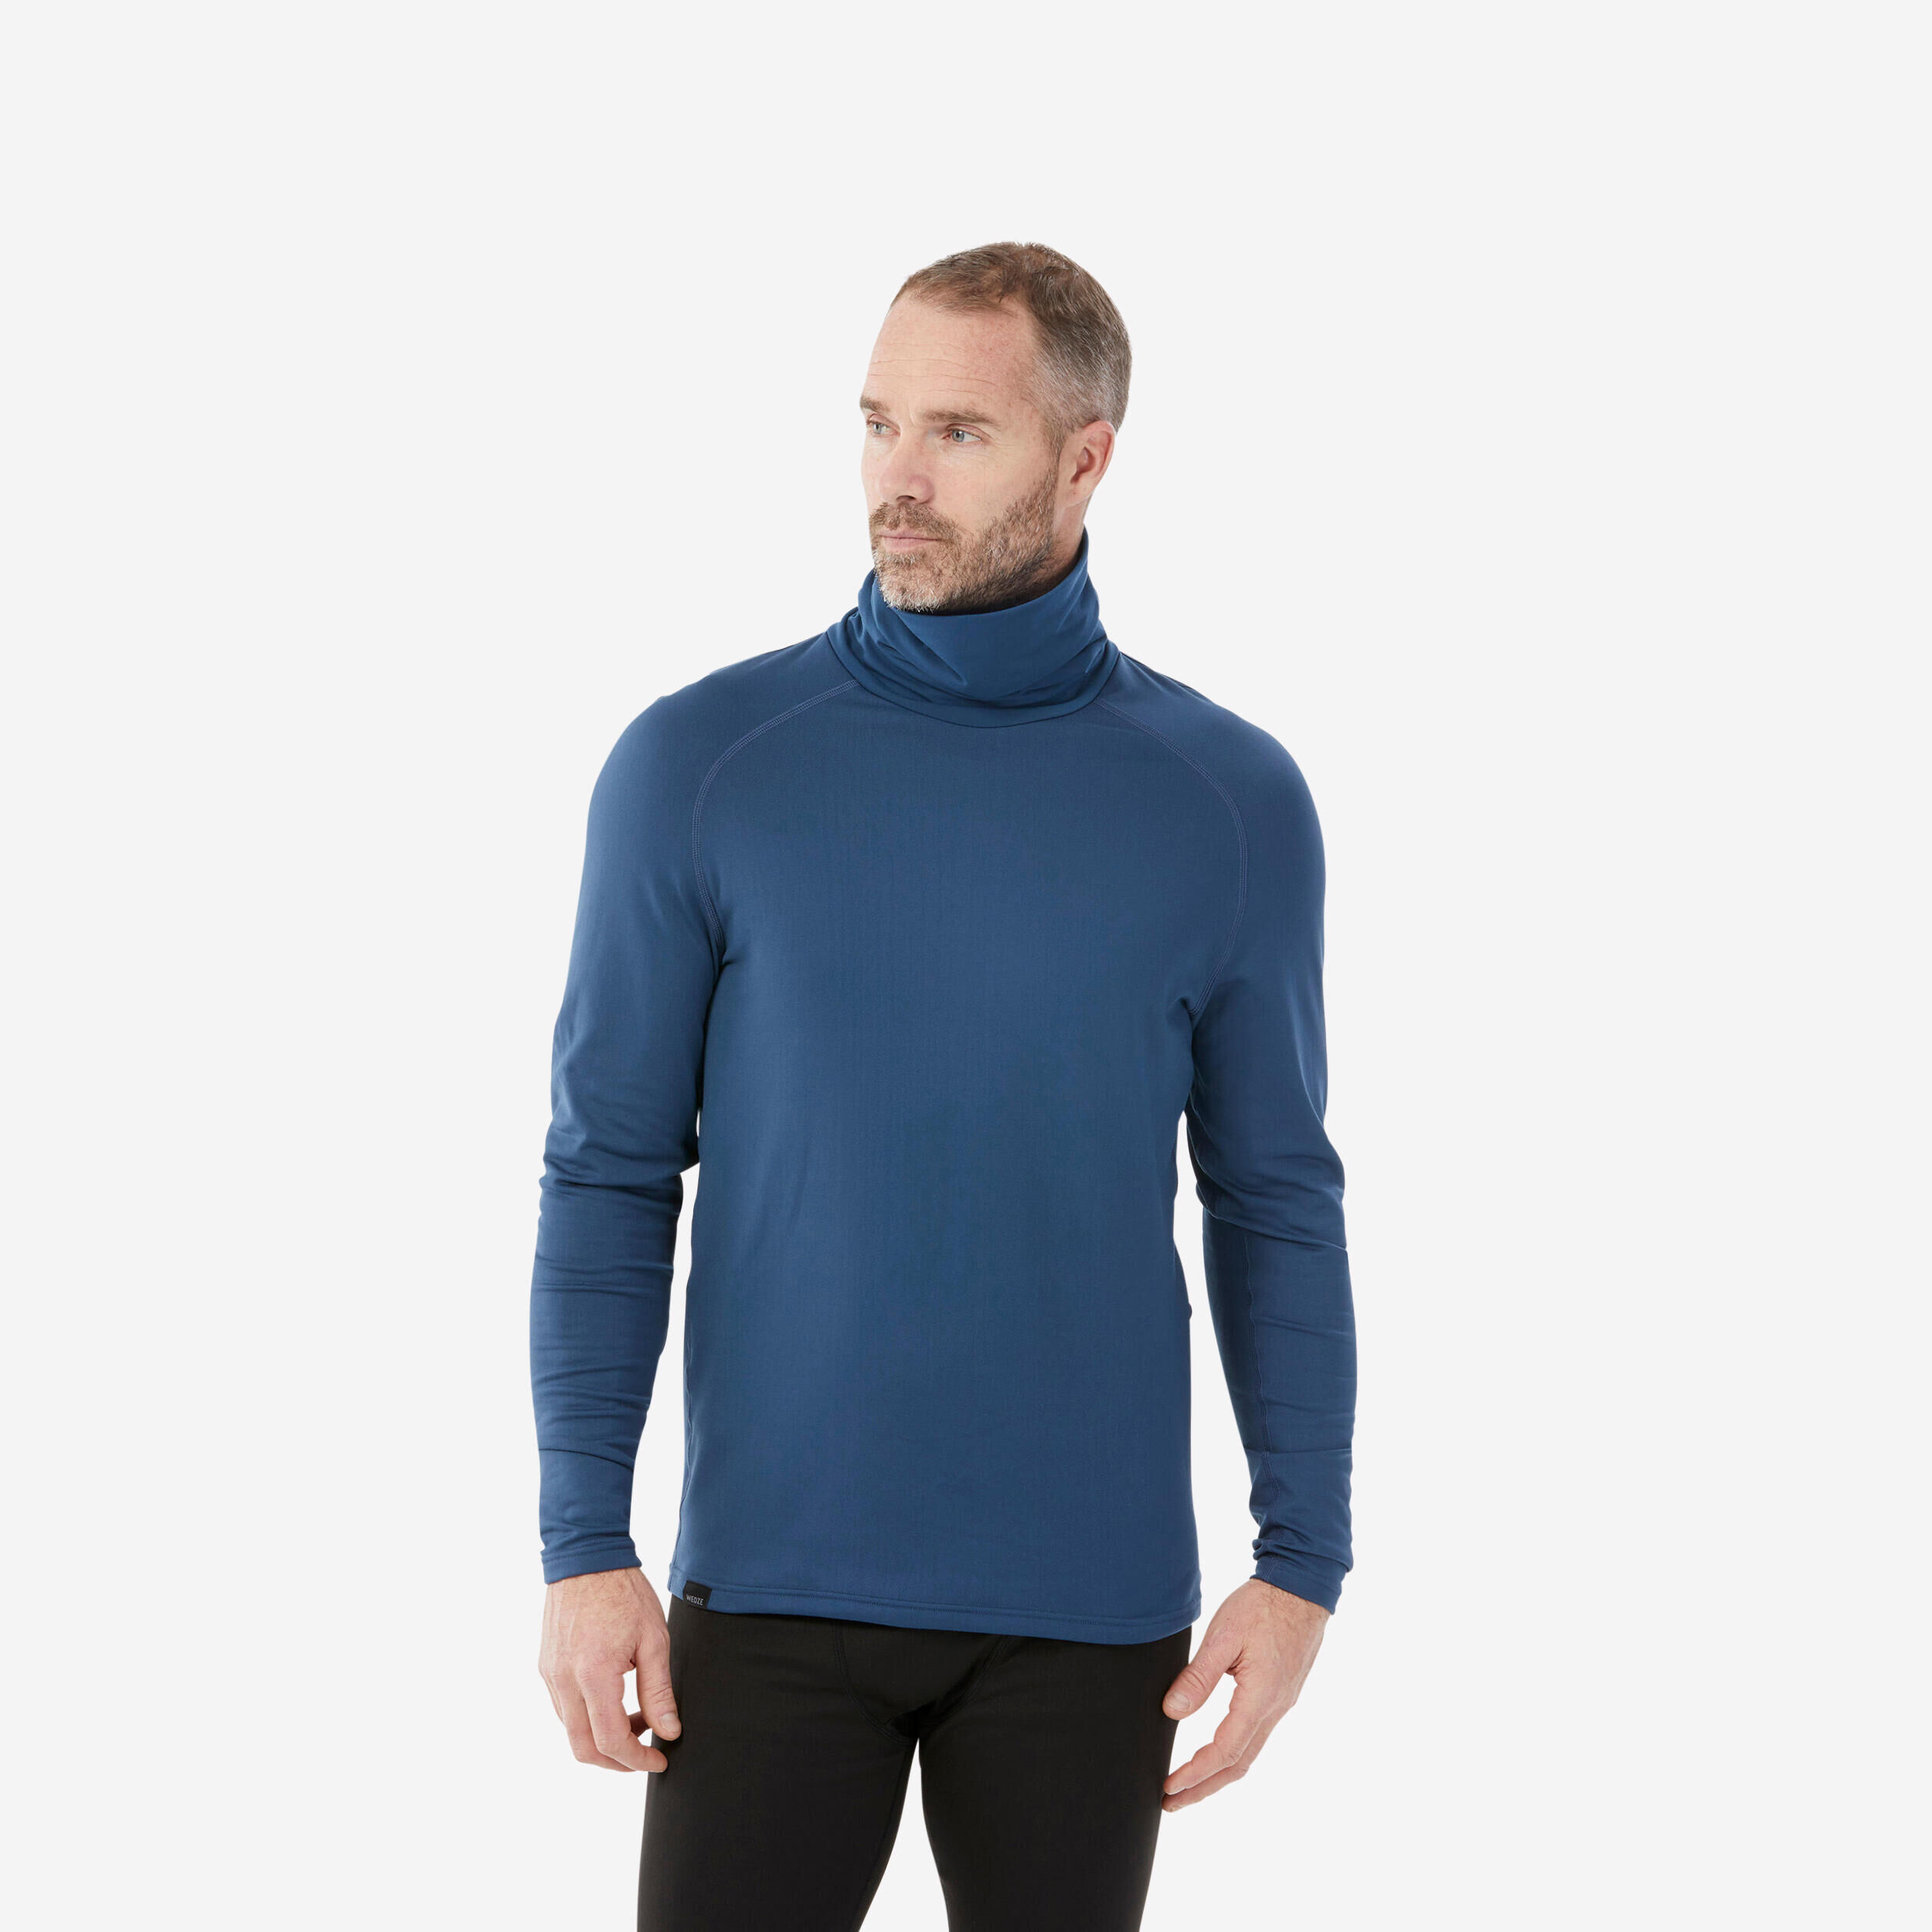 Men's Thermals, Base Layers